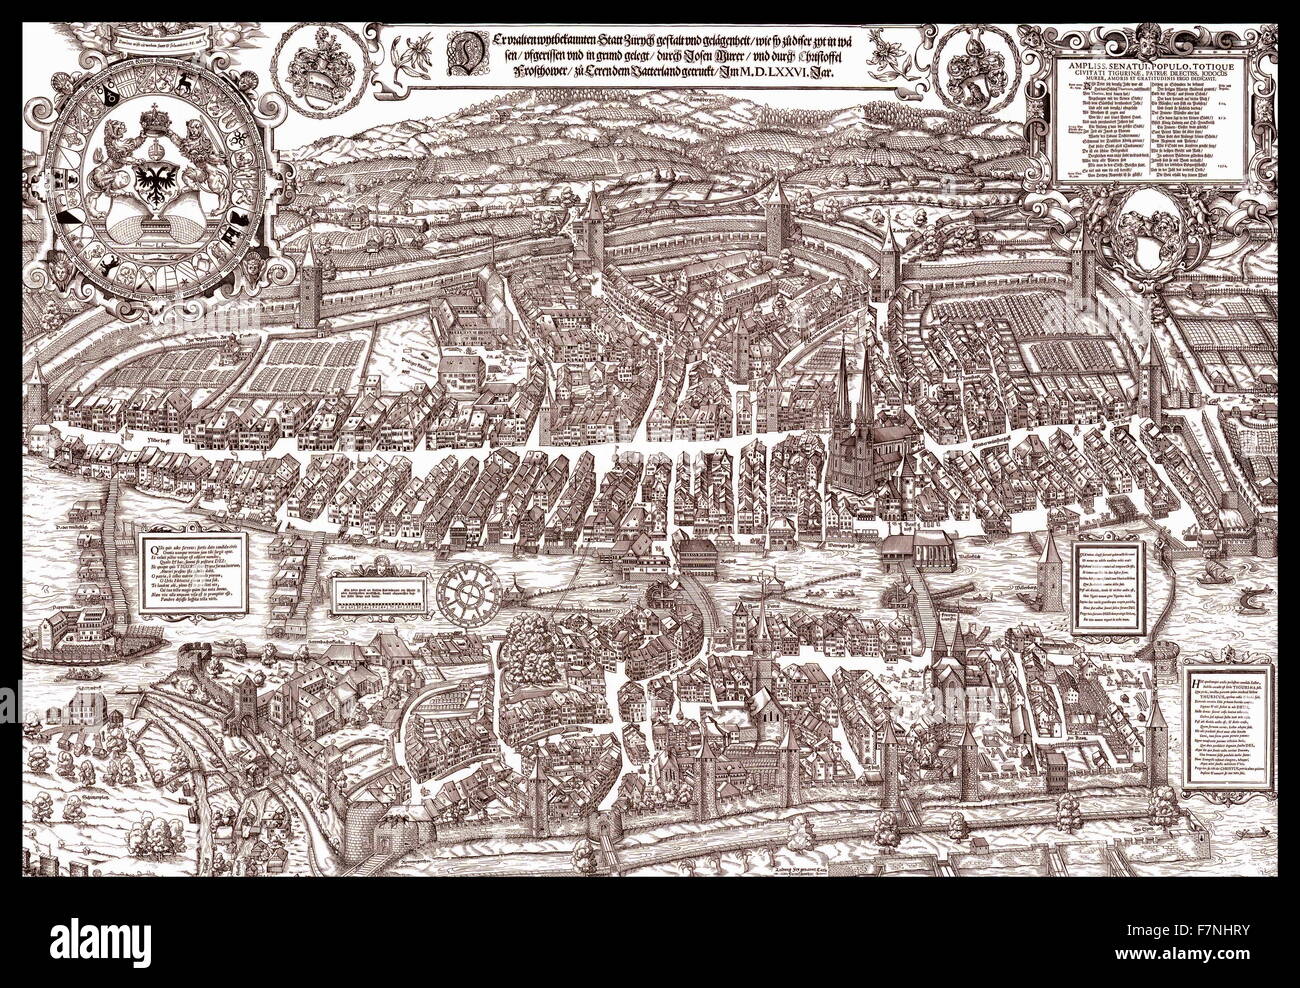 The Murer plan is a map of Zürich, printed in 1576 by Jos Murer (1530-1580). Stock Photo